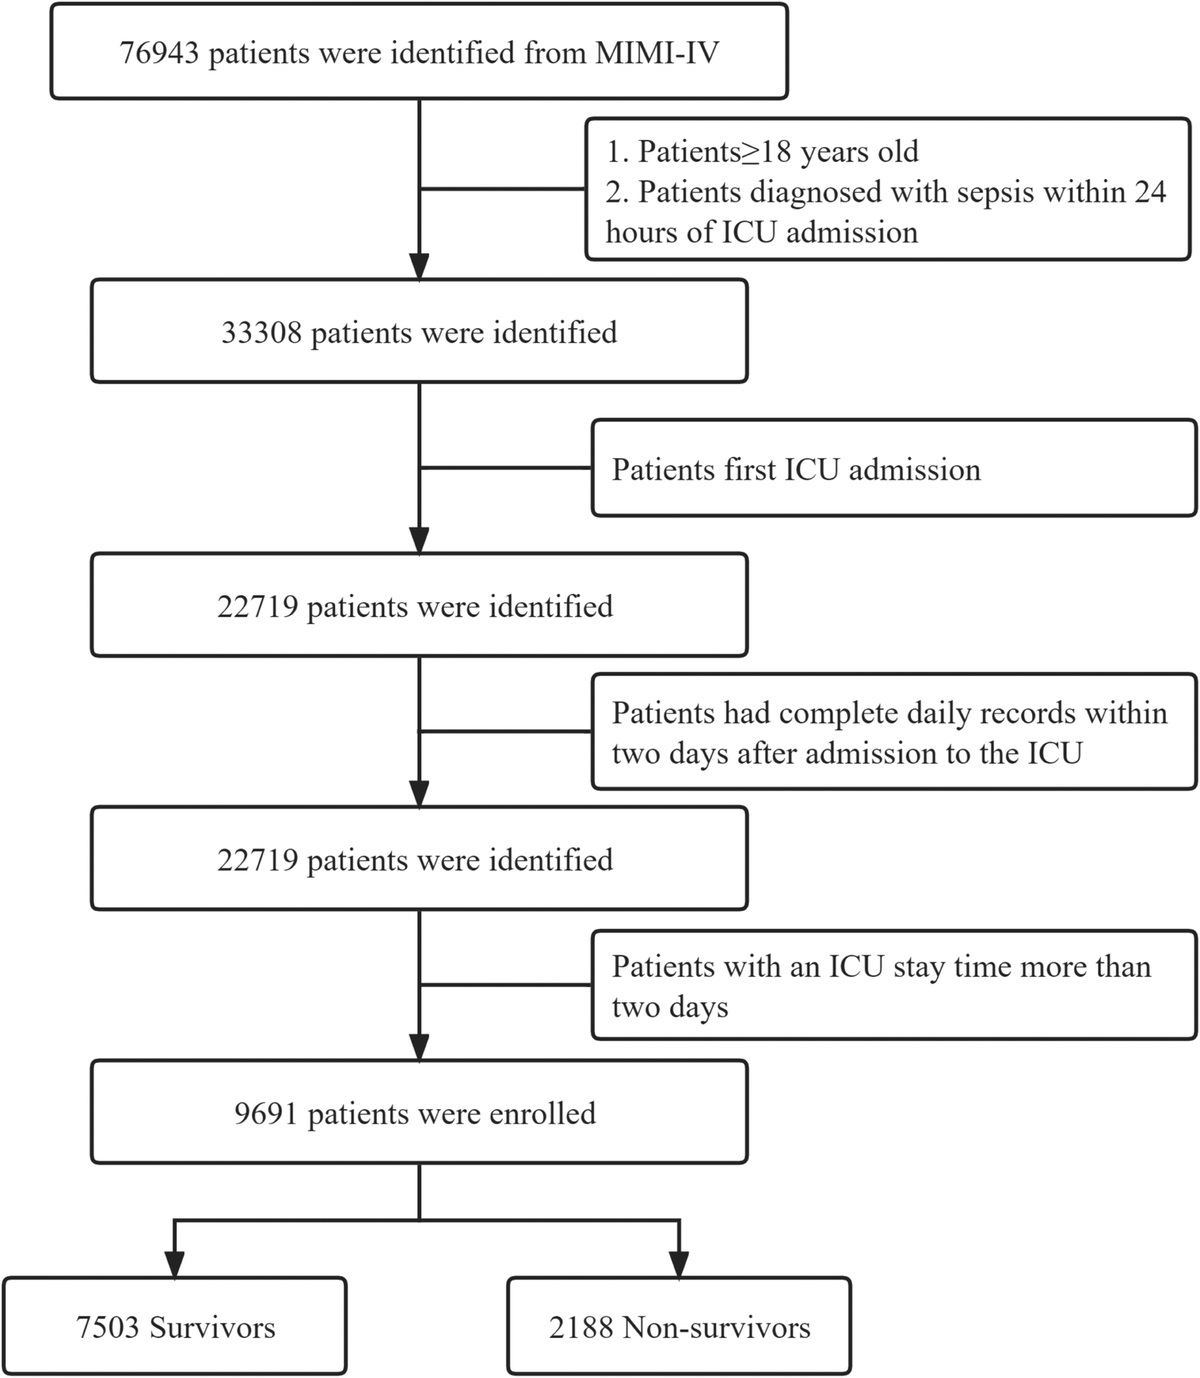 ANALYSIS OF THE RELATIONSHIP BETWEEN EARLY SERUM PHOSPHATE LEVELS AND SHORT-TERM MORTALITY IN SEPTIC PATIENTS: A RETROSPECTIVE STUDY BASED ON MIMIC-IV